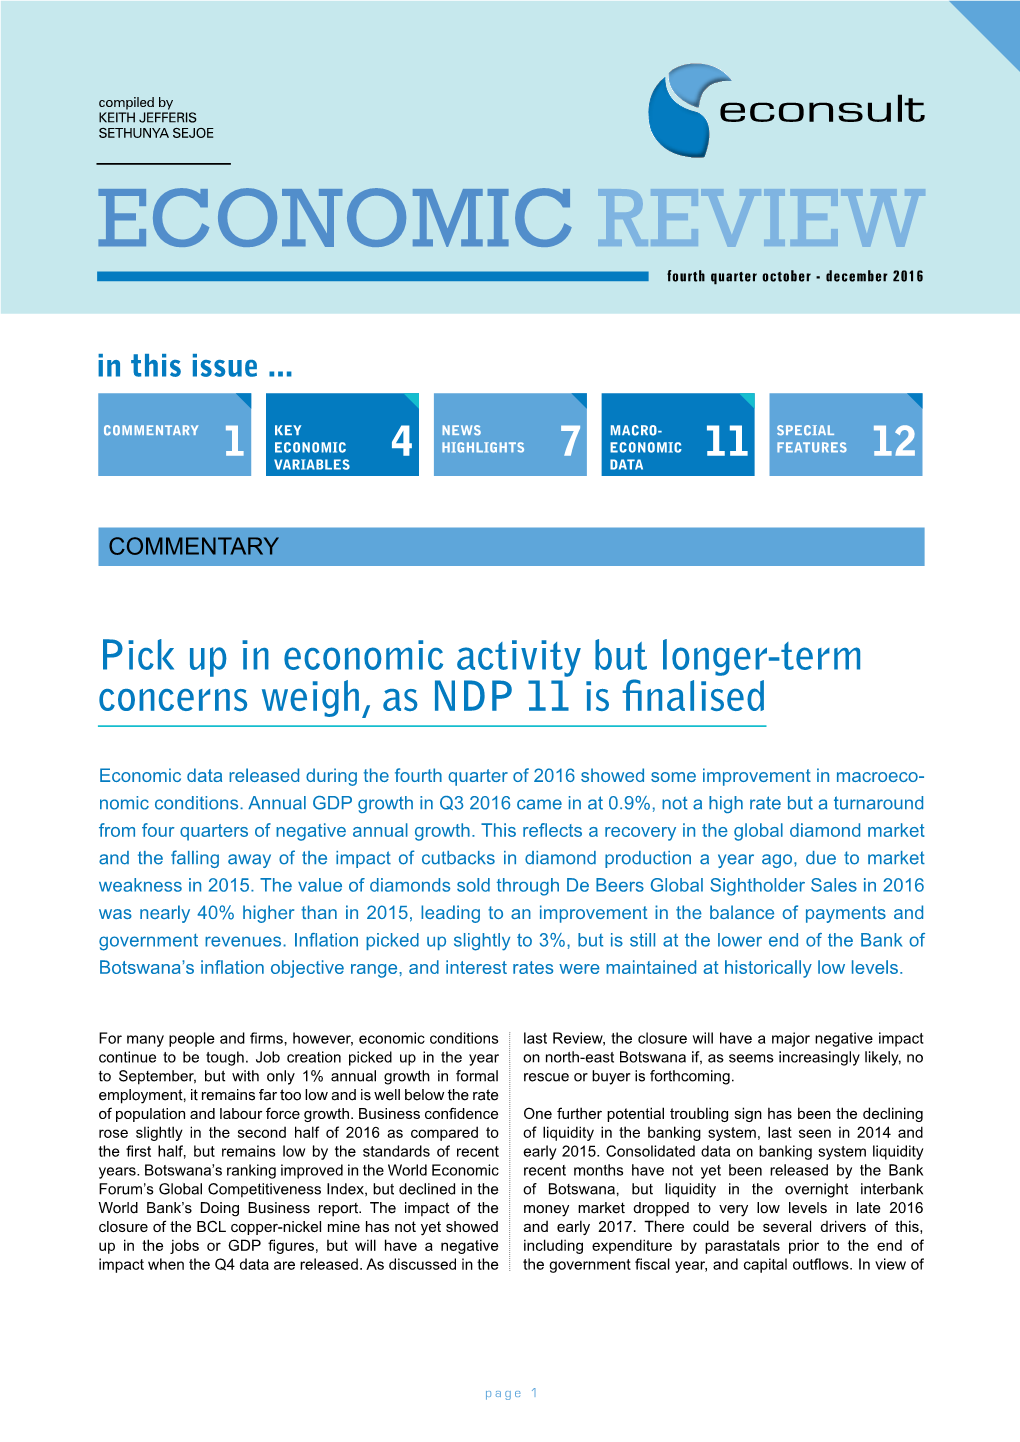 ECONOMIC REVIEW Fourth Quarter October - December 2016 in This Issue